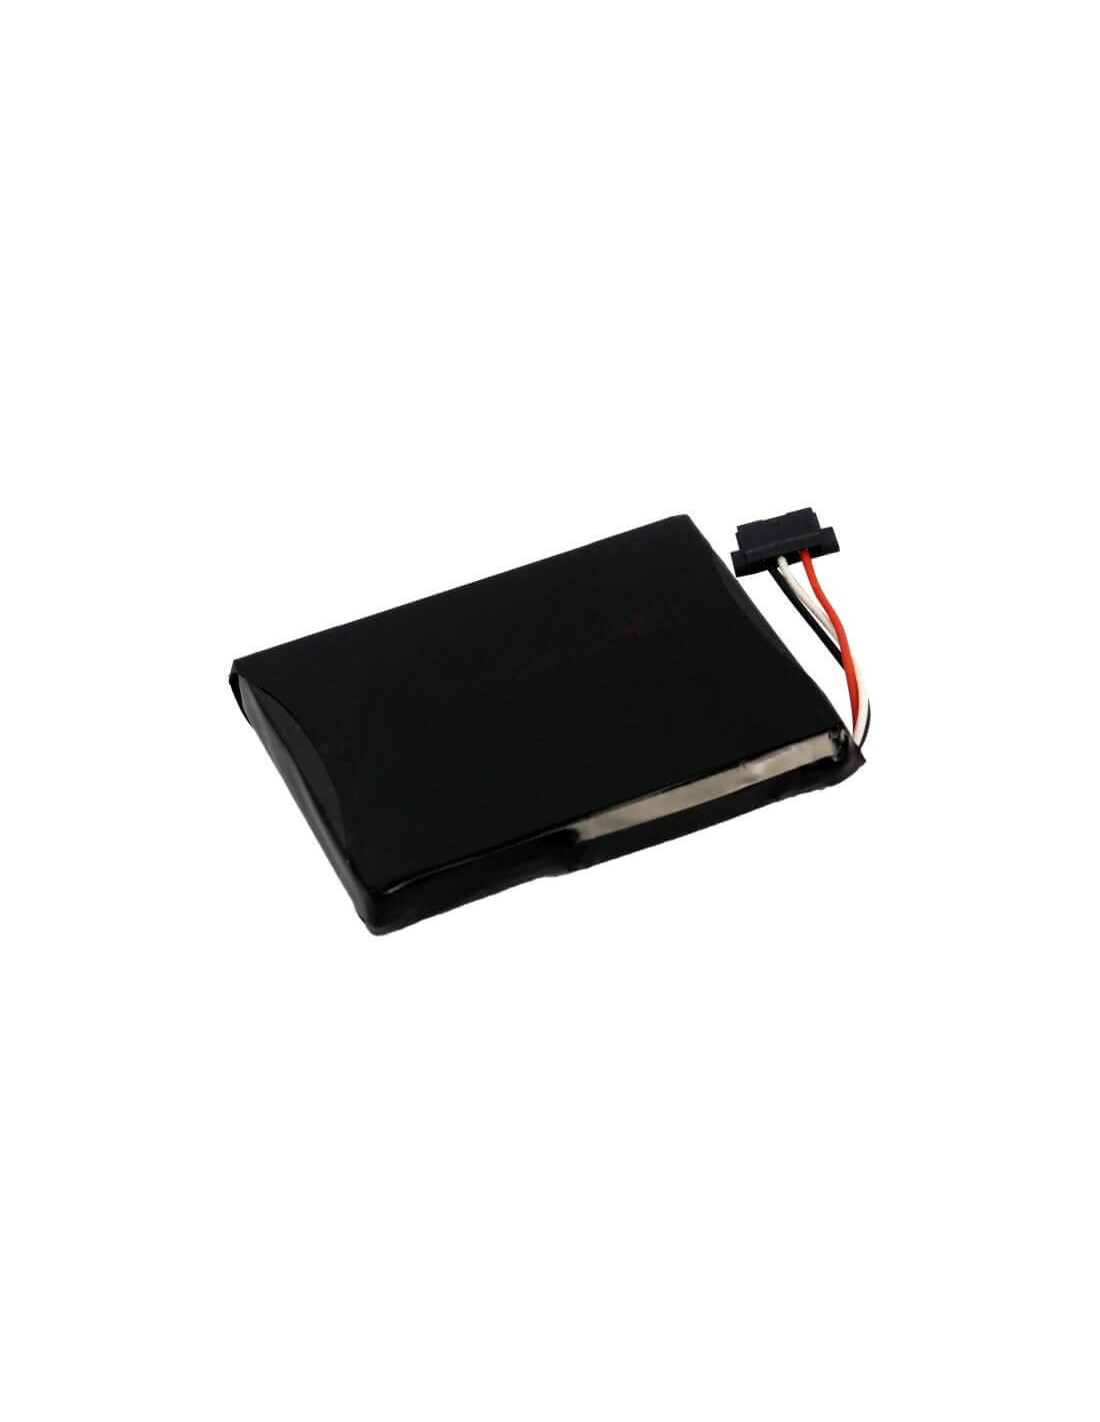 Battery for Airis T610, T620, T920 3.7V, 1250mAh - 4.63Wh